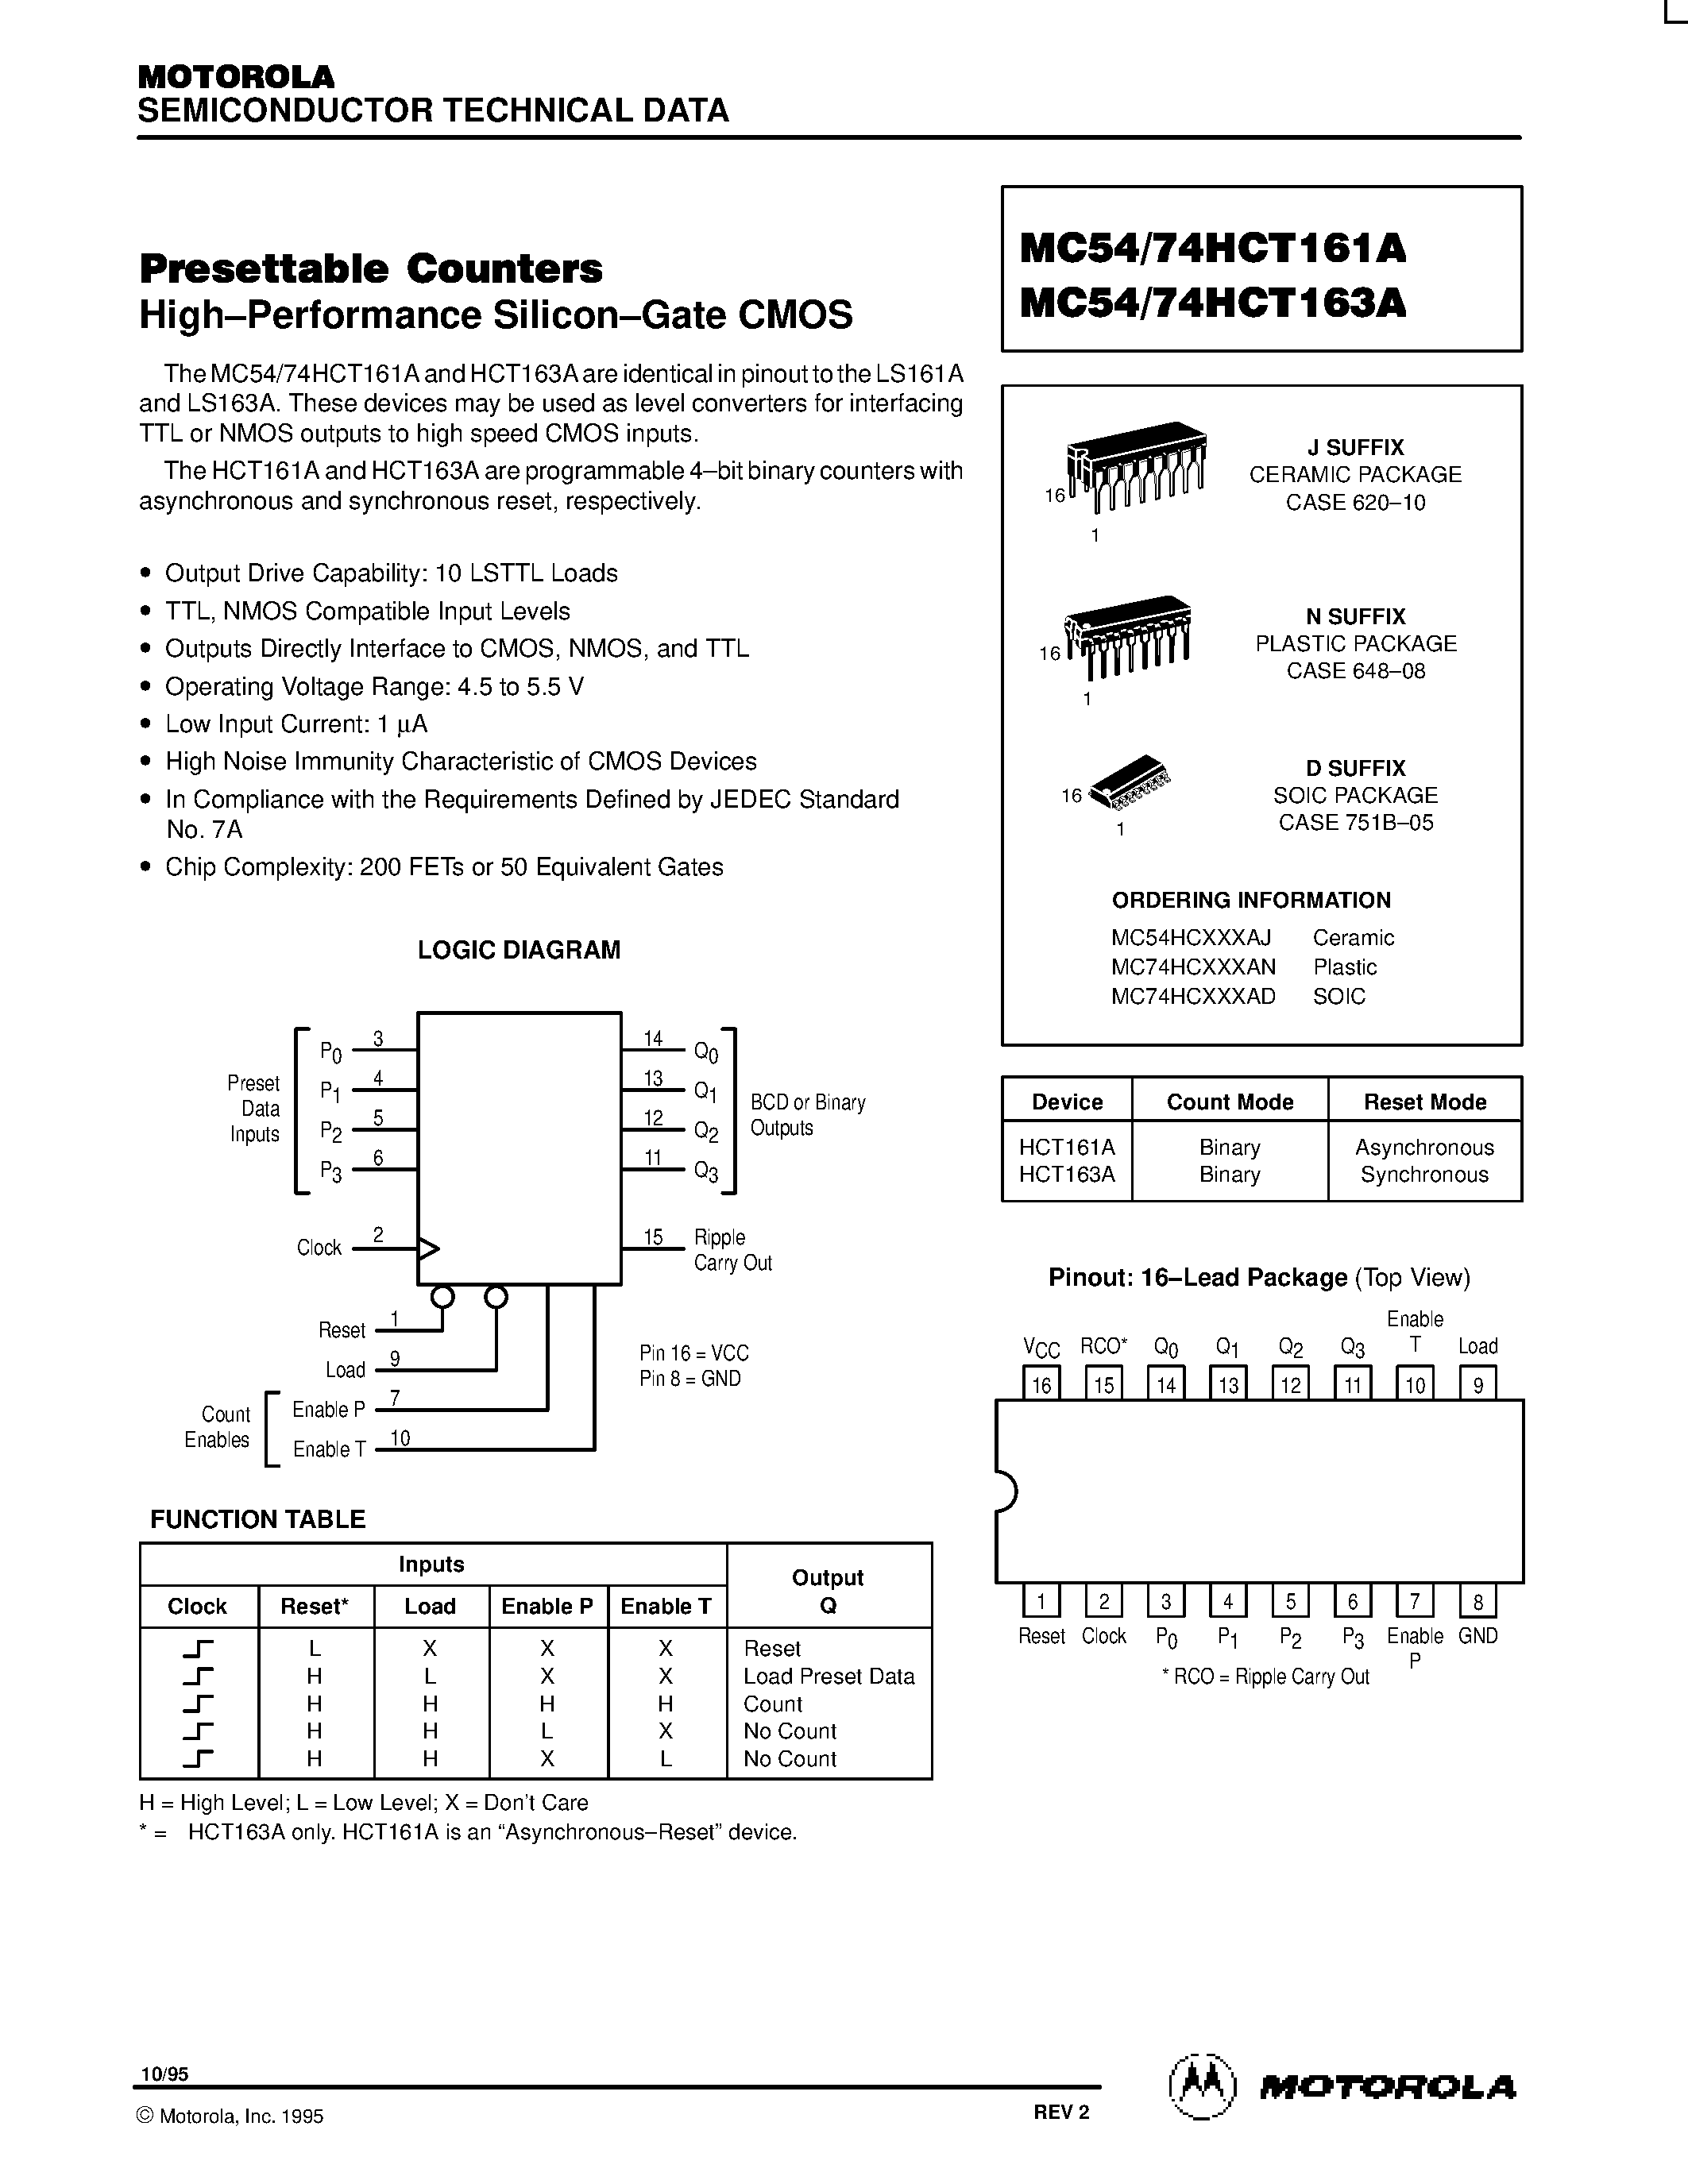 Datasheet MC54HCT161A - (MC54HCT161A / MC54HCT163A) PRESETTABLE COUNTERS HIGH-PERFORMANCE SILICON-GATE CMOS page 1